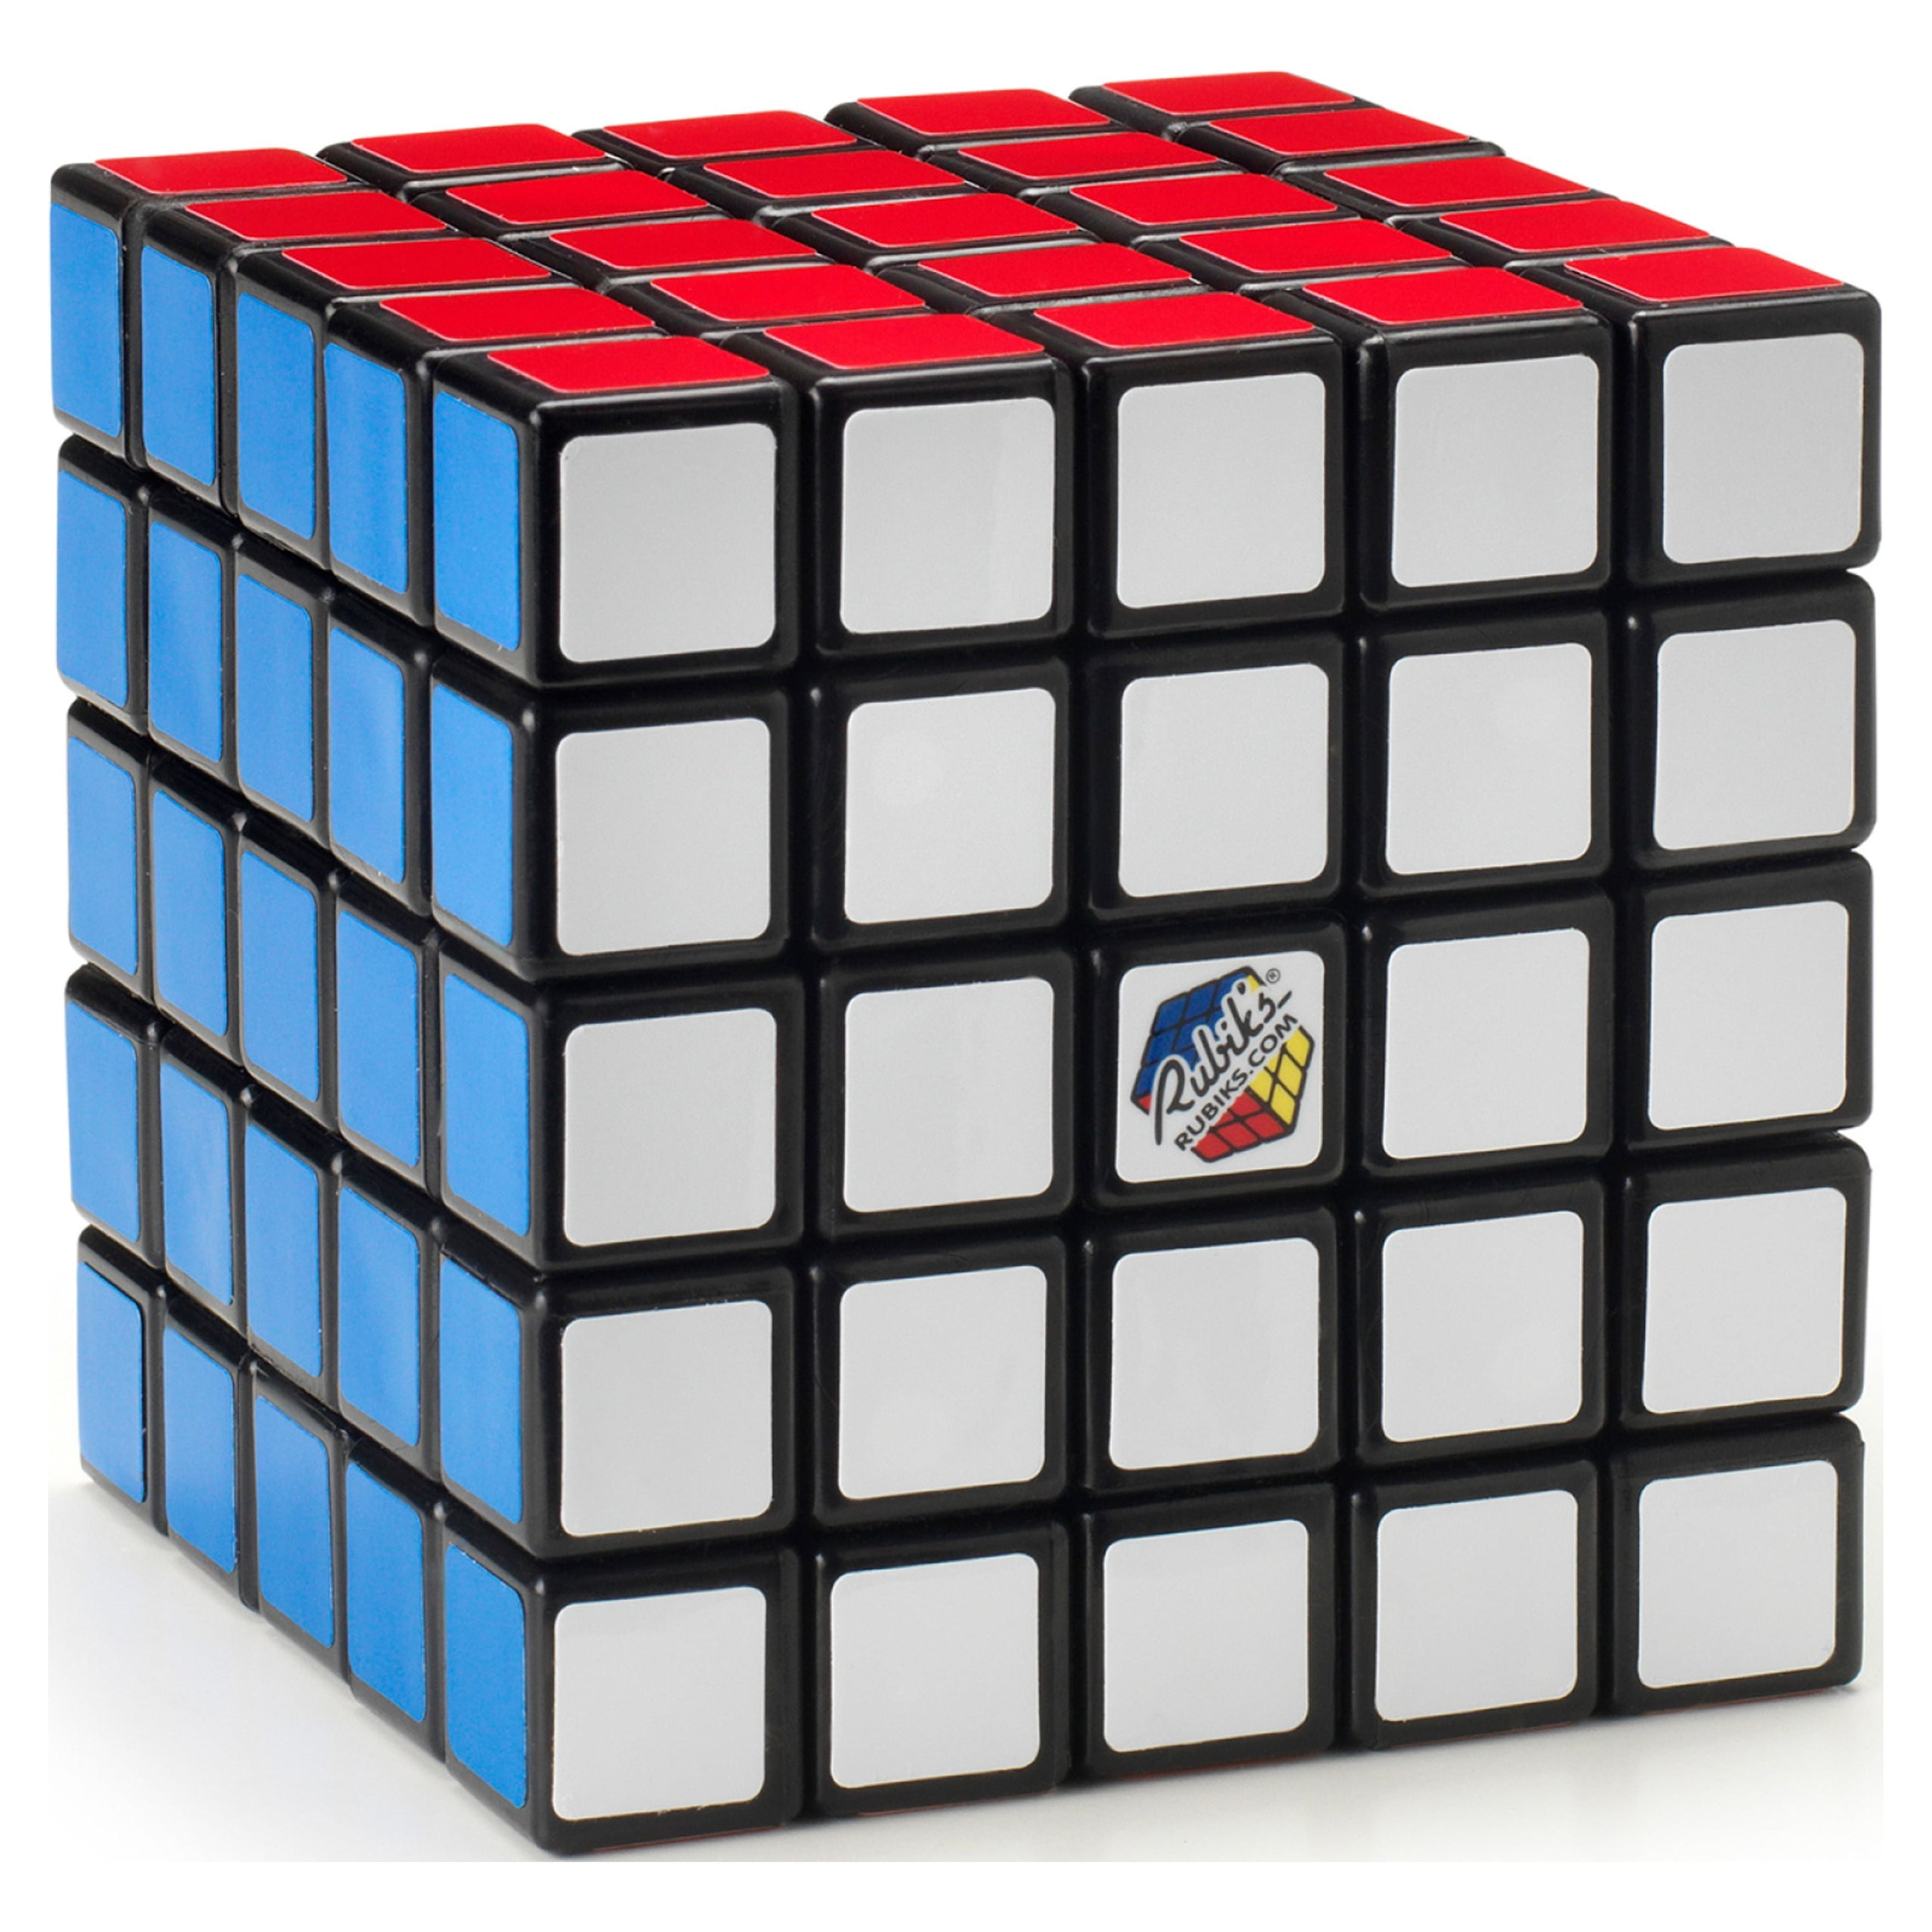 Rubik’s Professor, 5x5 Cube Color-Matching Puzzle Highly Complex Challenging Problem-Solving Brain Teaser Fidget Toy, for Adults & Kids Ages 8 and up